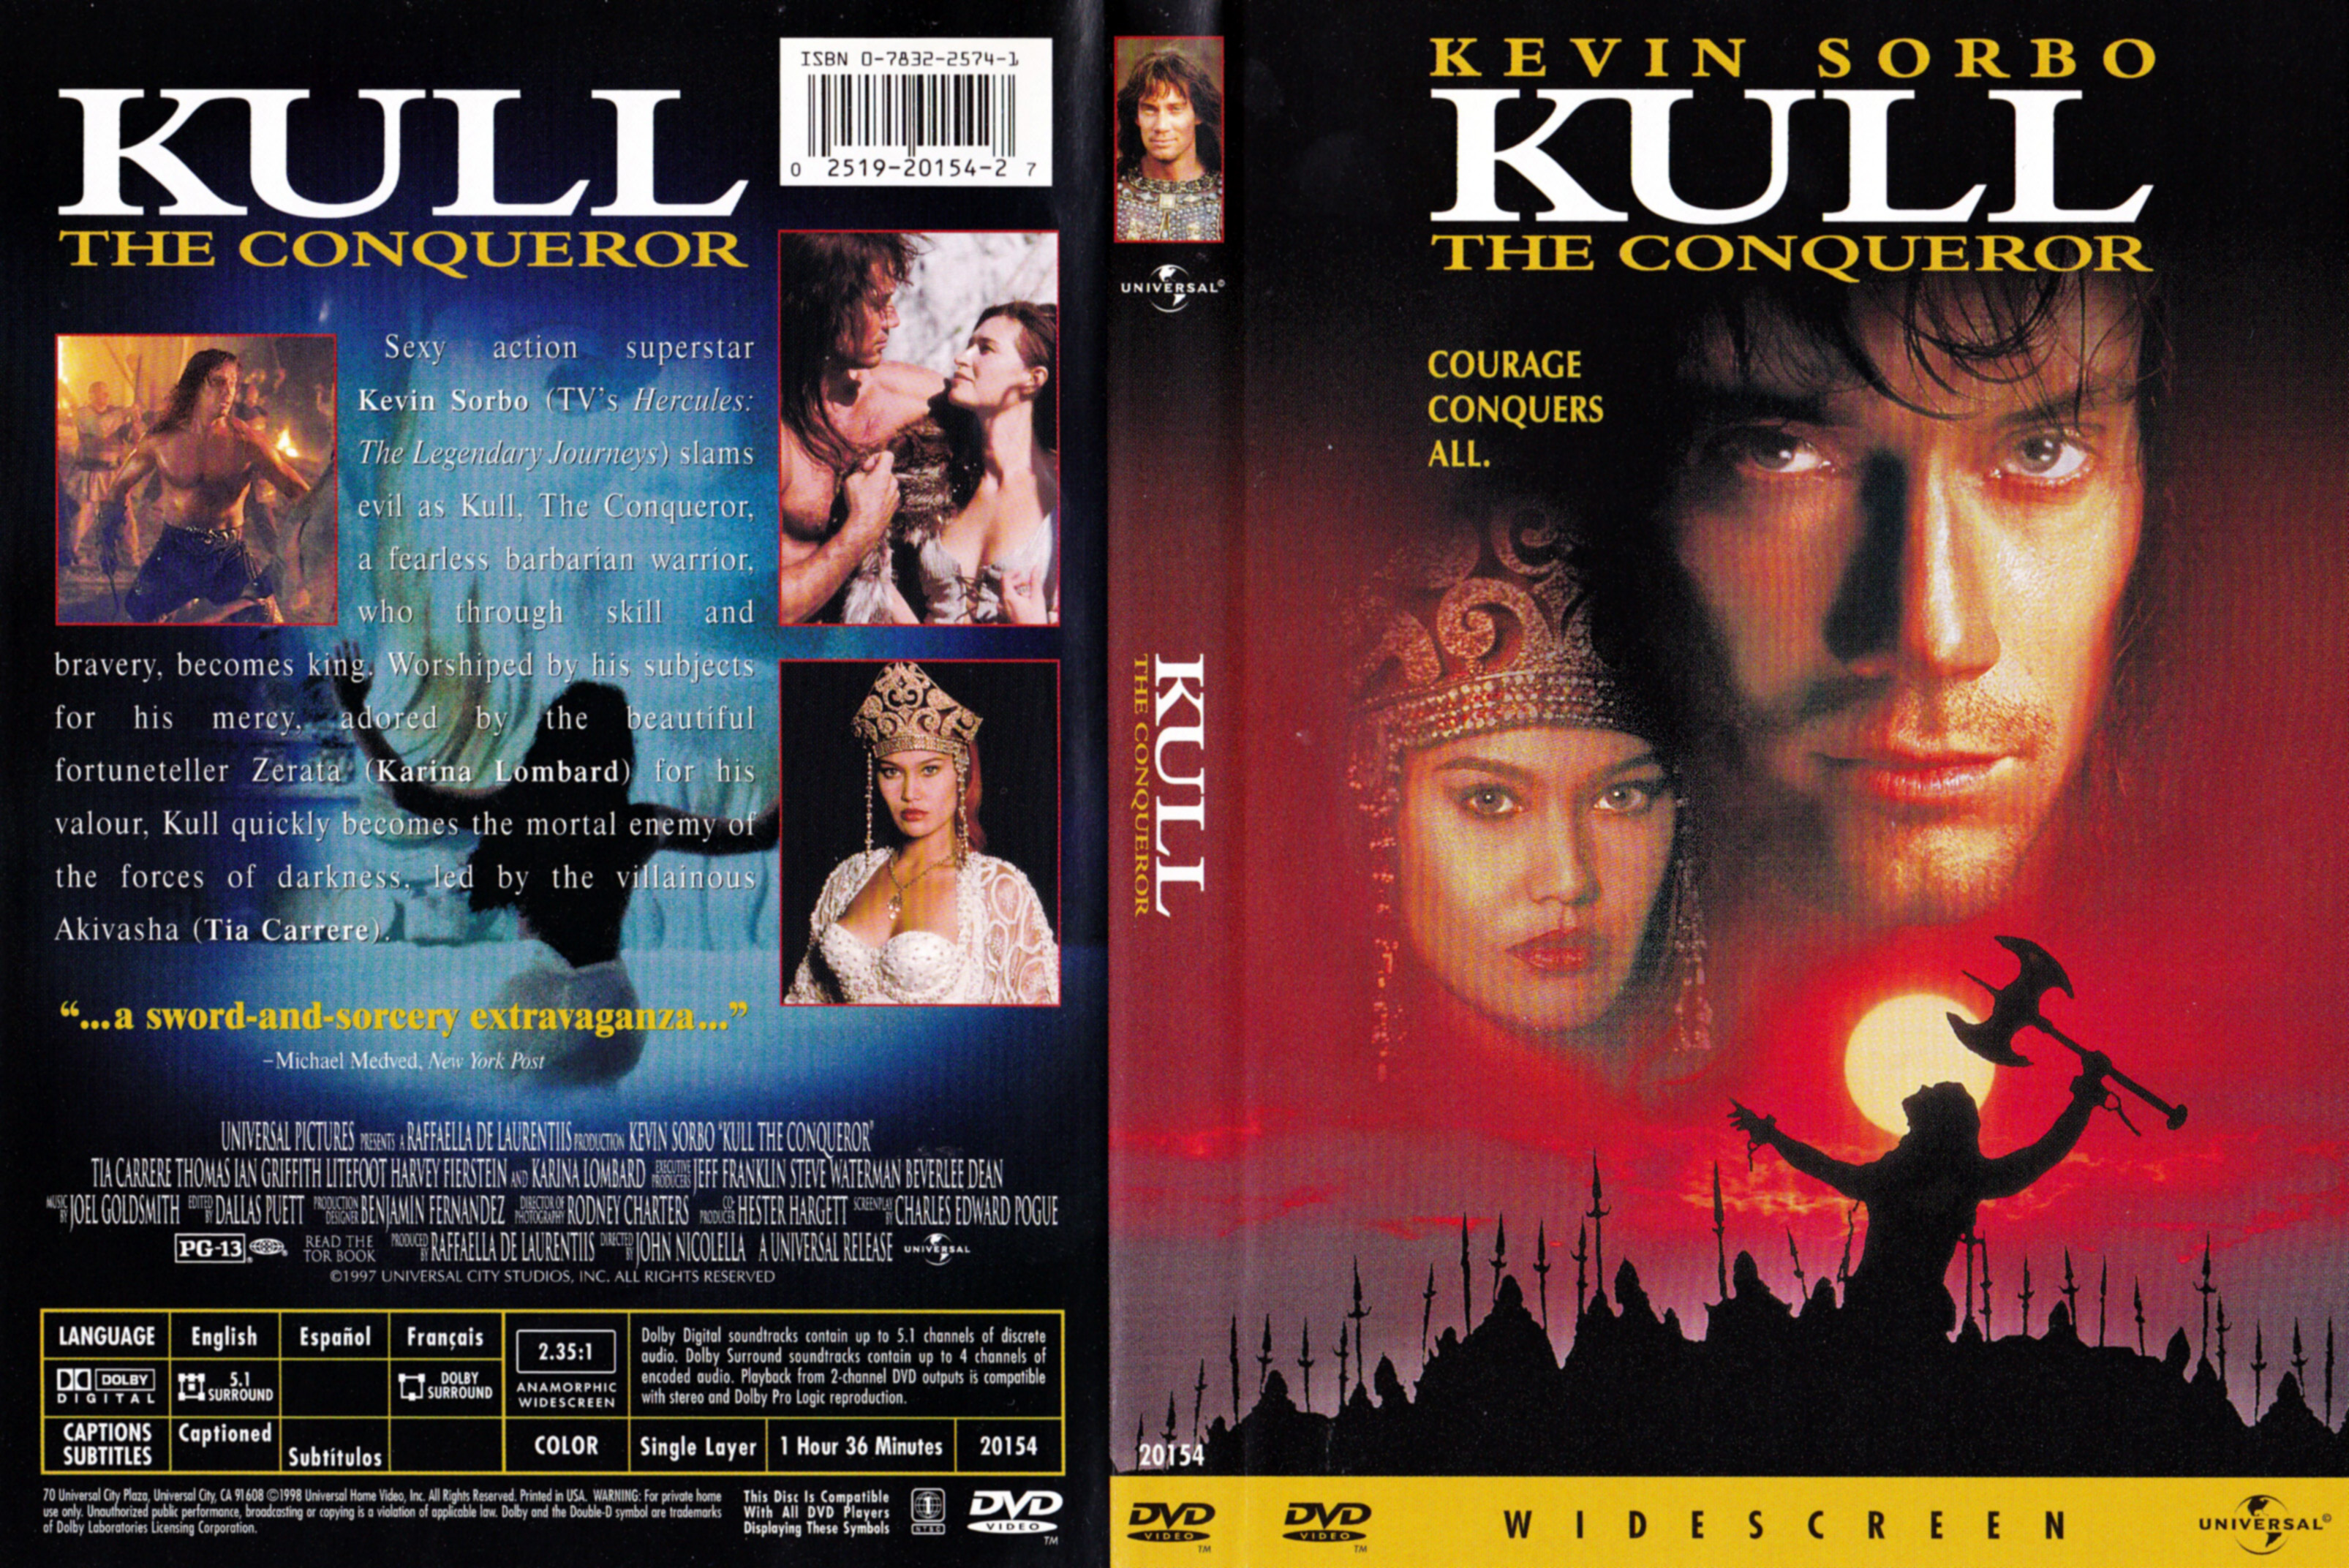 Jaquette DVD Kull The conqueror (Canadienne)